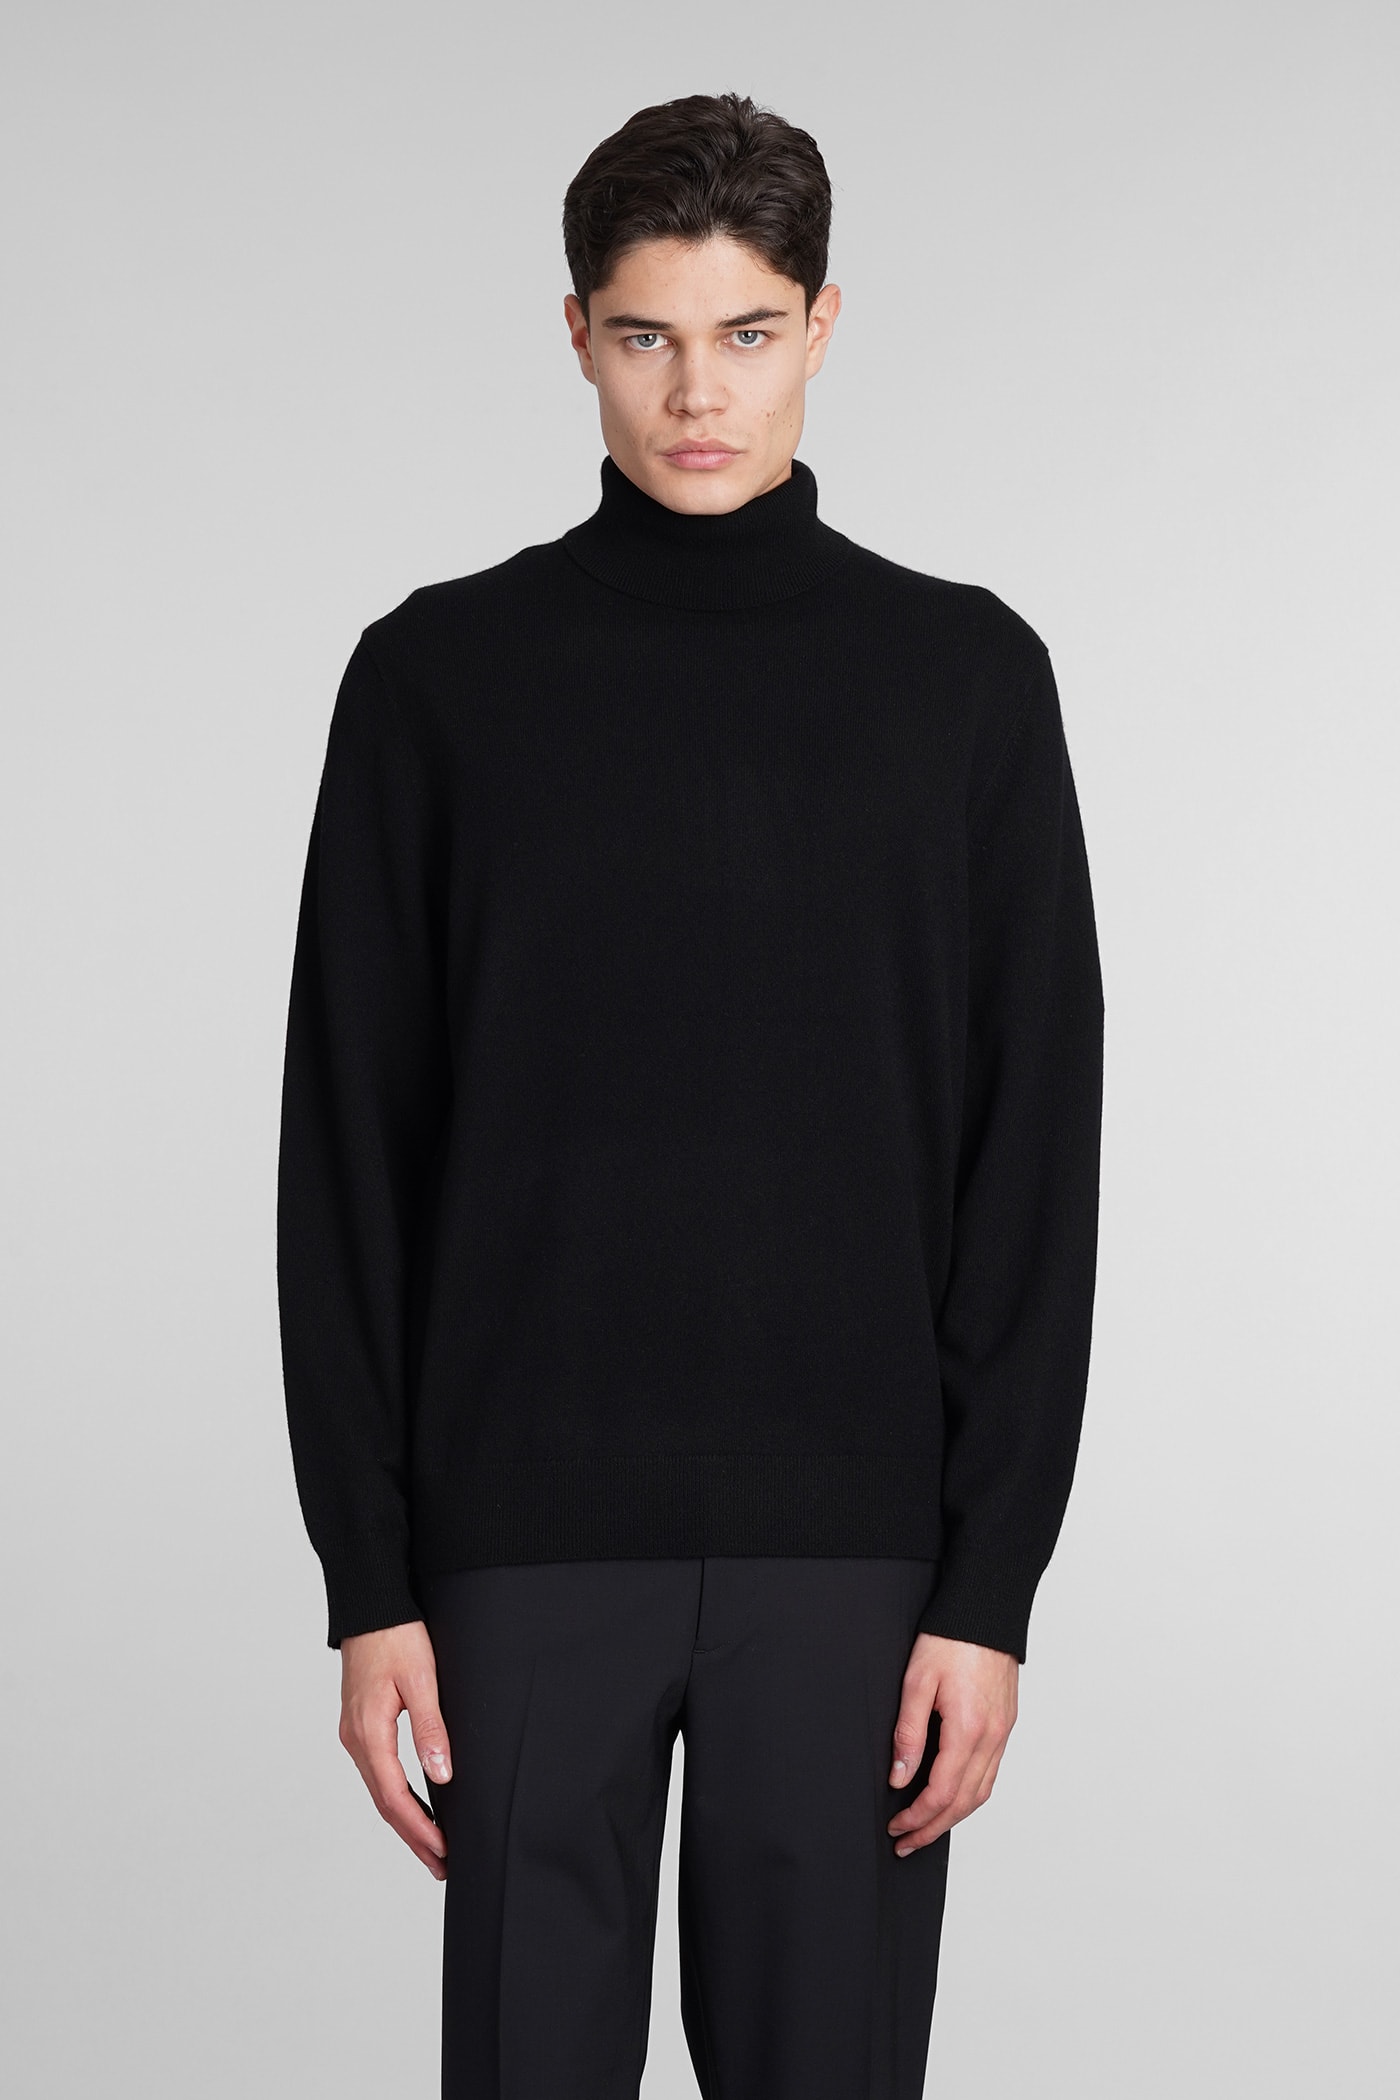 THEORY KNITWEAR IN BLACK CASHMERE